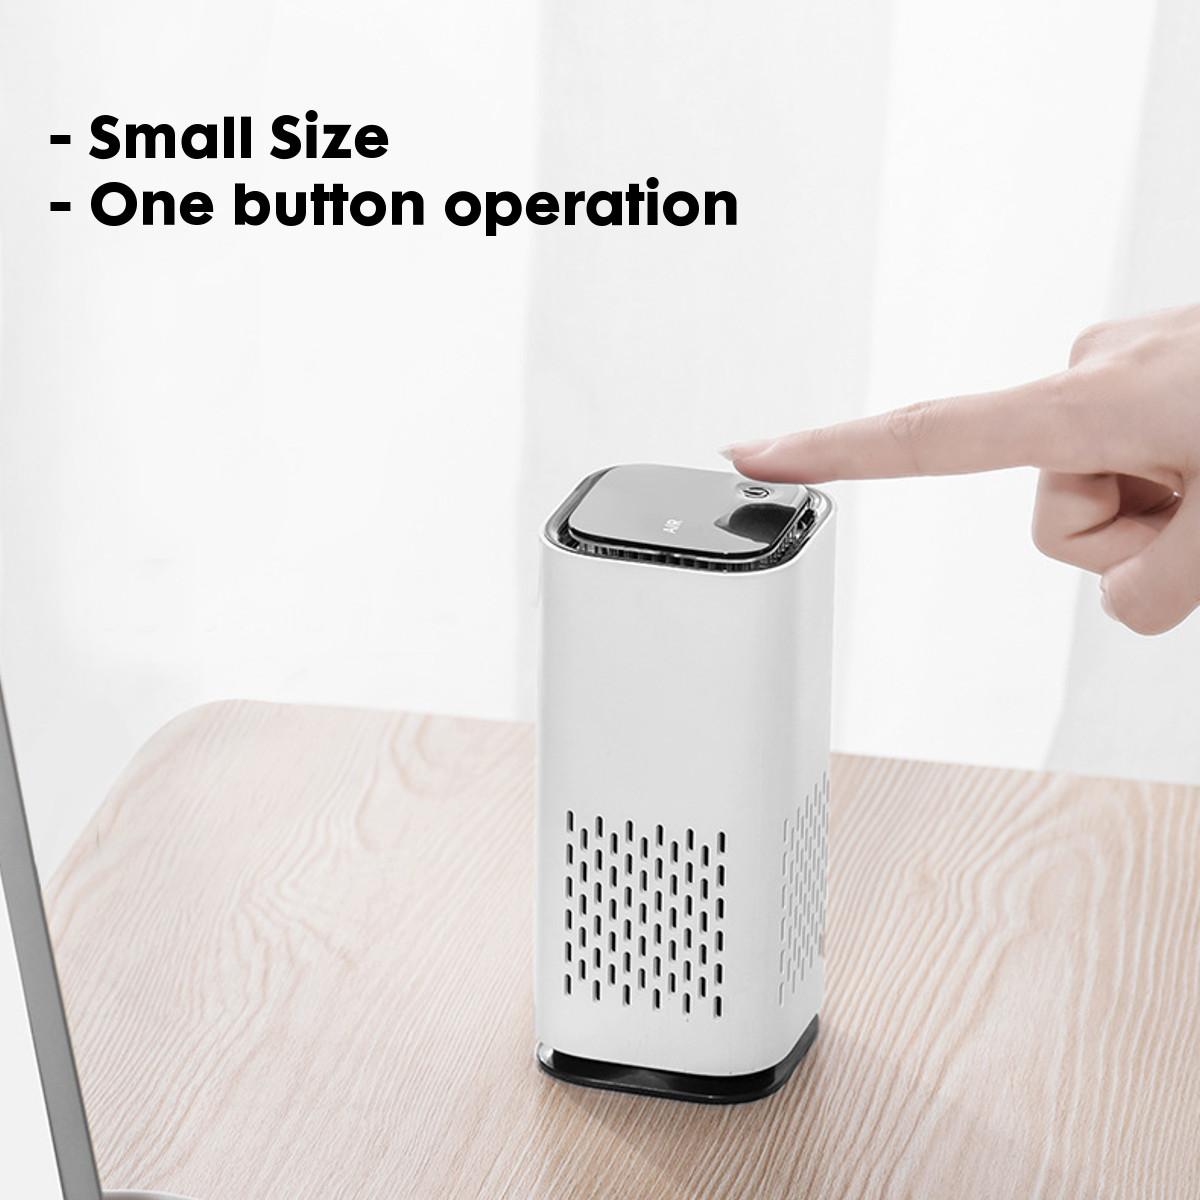 Bakeey-Mini-Air-Purifier-With-7-Color-Light-USB-Smart-Home-Car-Fresh-Oxygen-Ionizer-Smoke-Cleaner-1854025-6